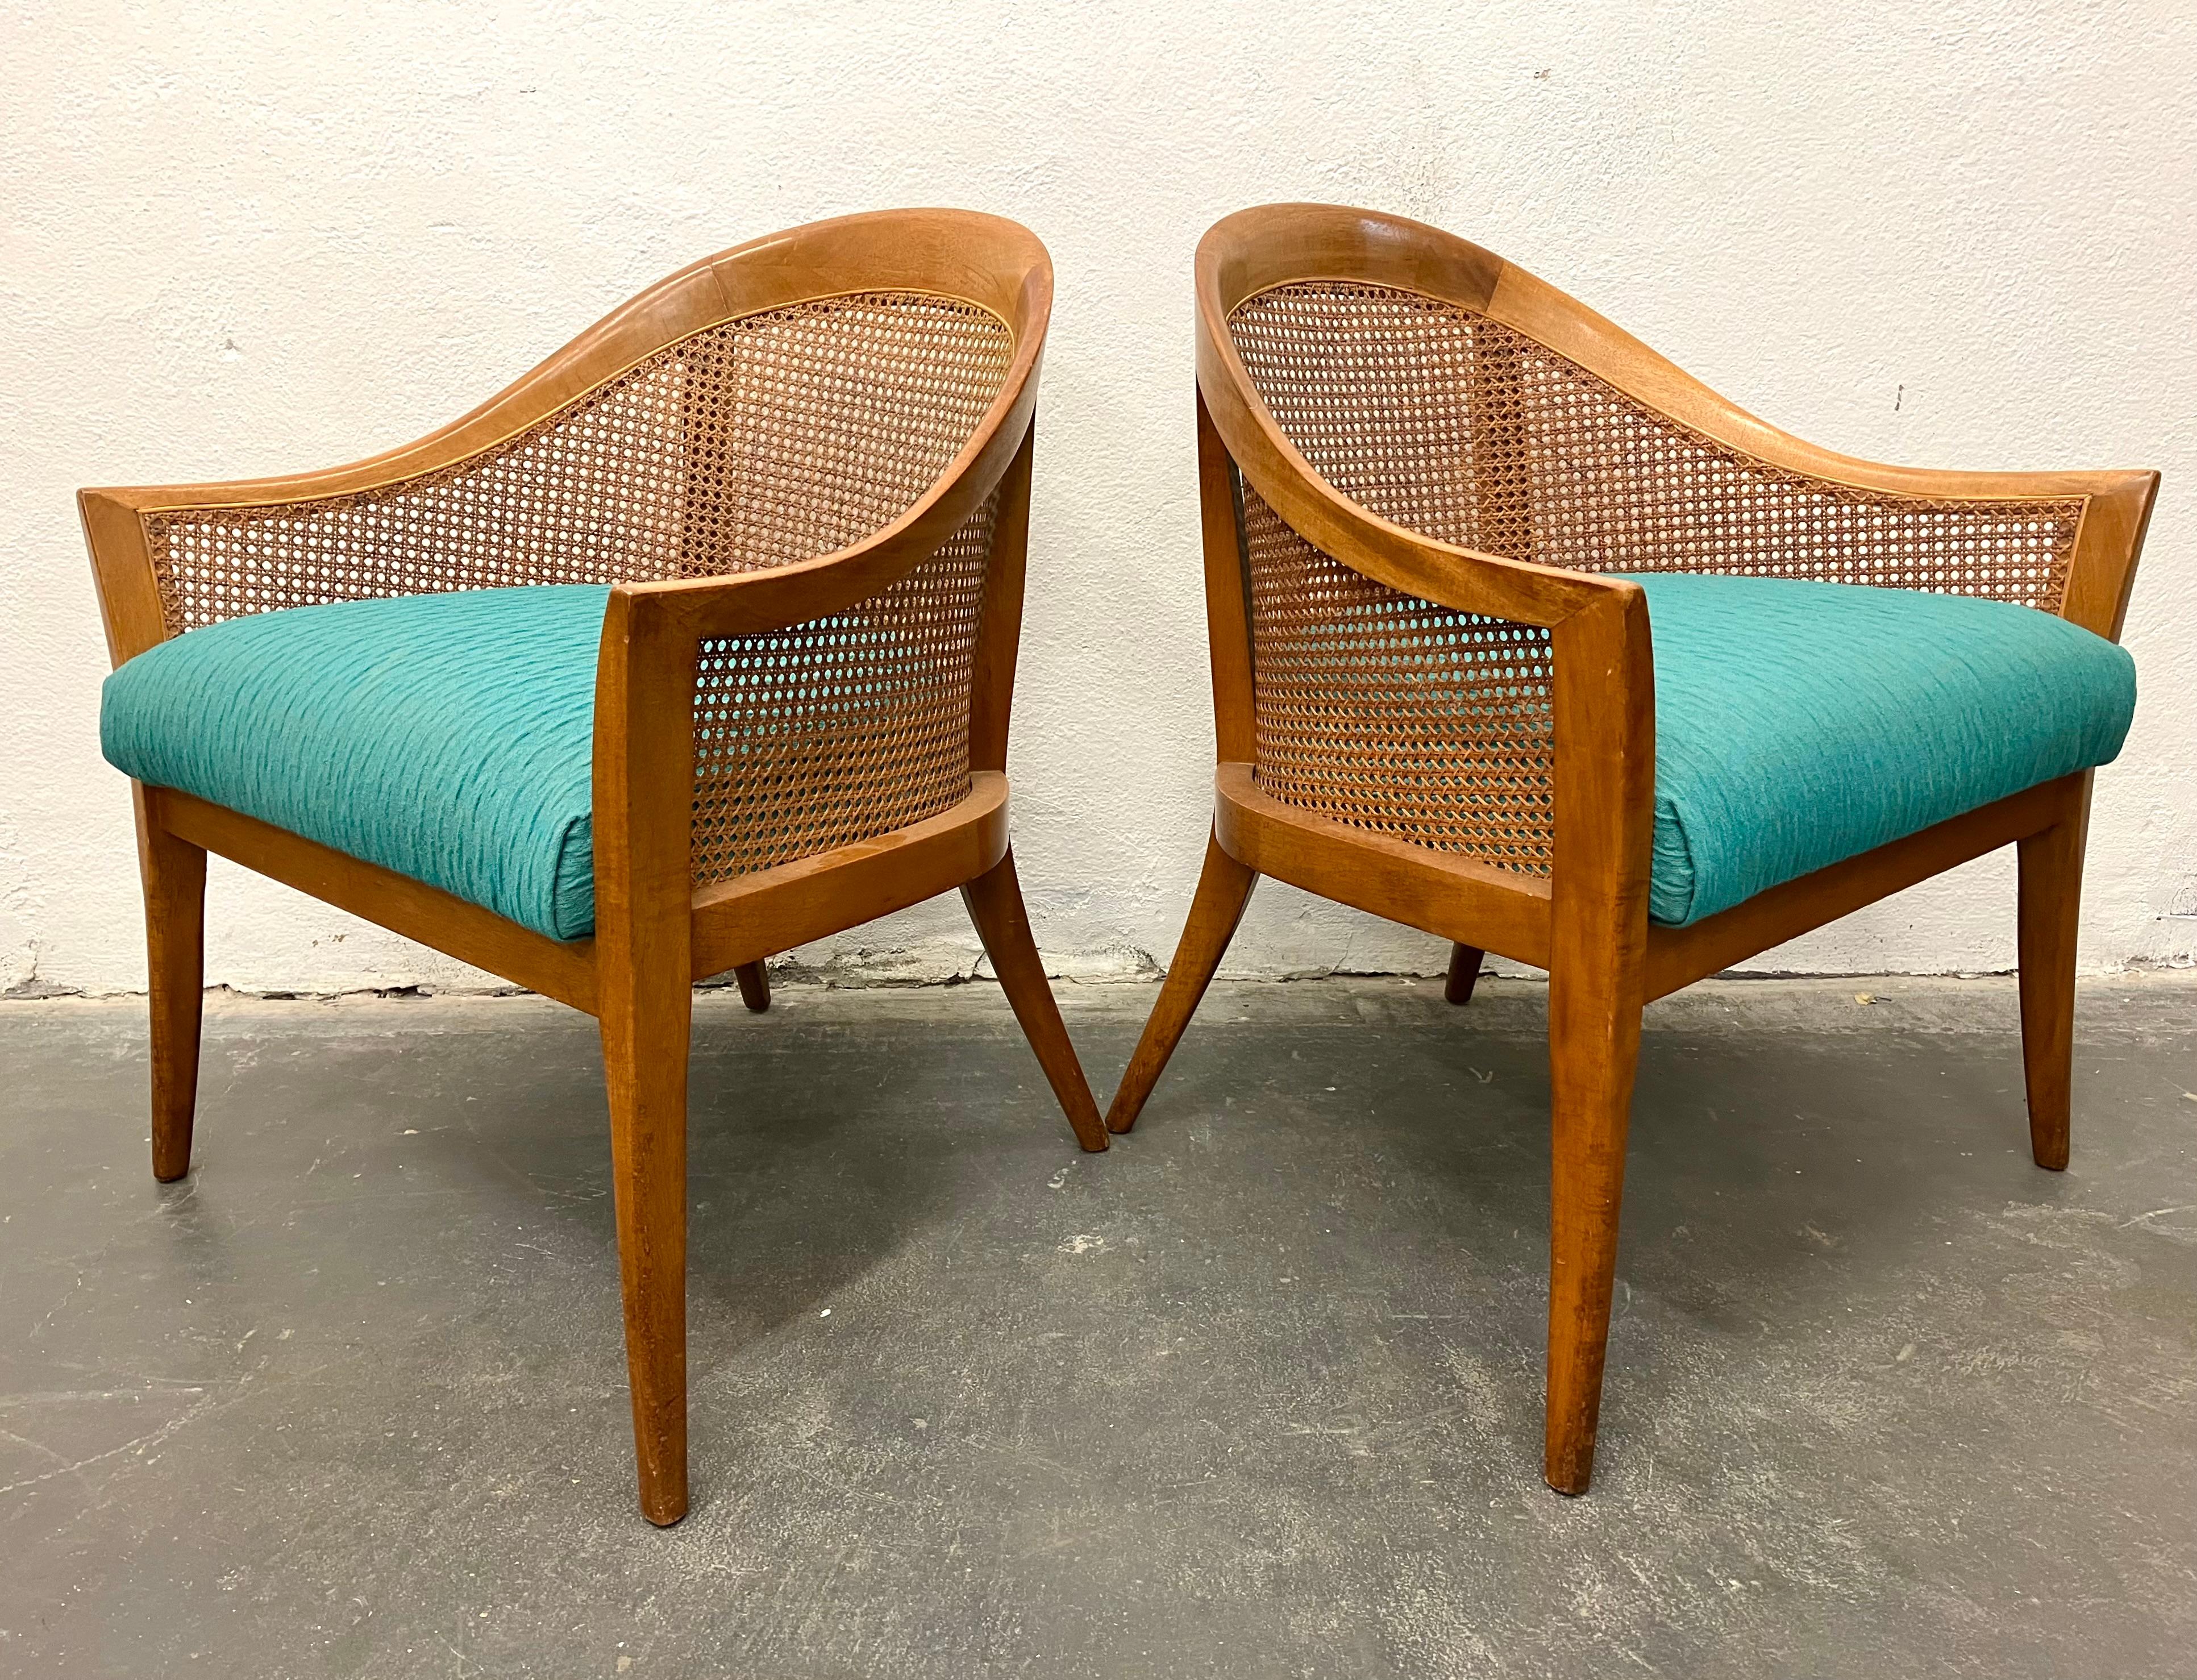 Elegant pair of lounge chairs in bleached mahogany with caned sides. The tapered and tailored design easily works in both traditional and ultra-modern interiors.